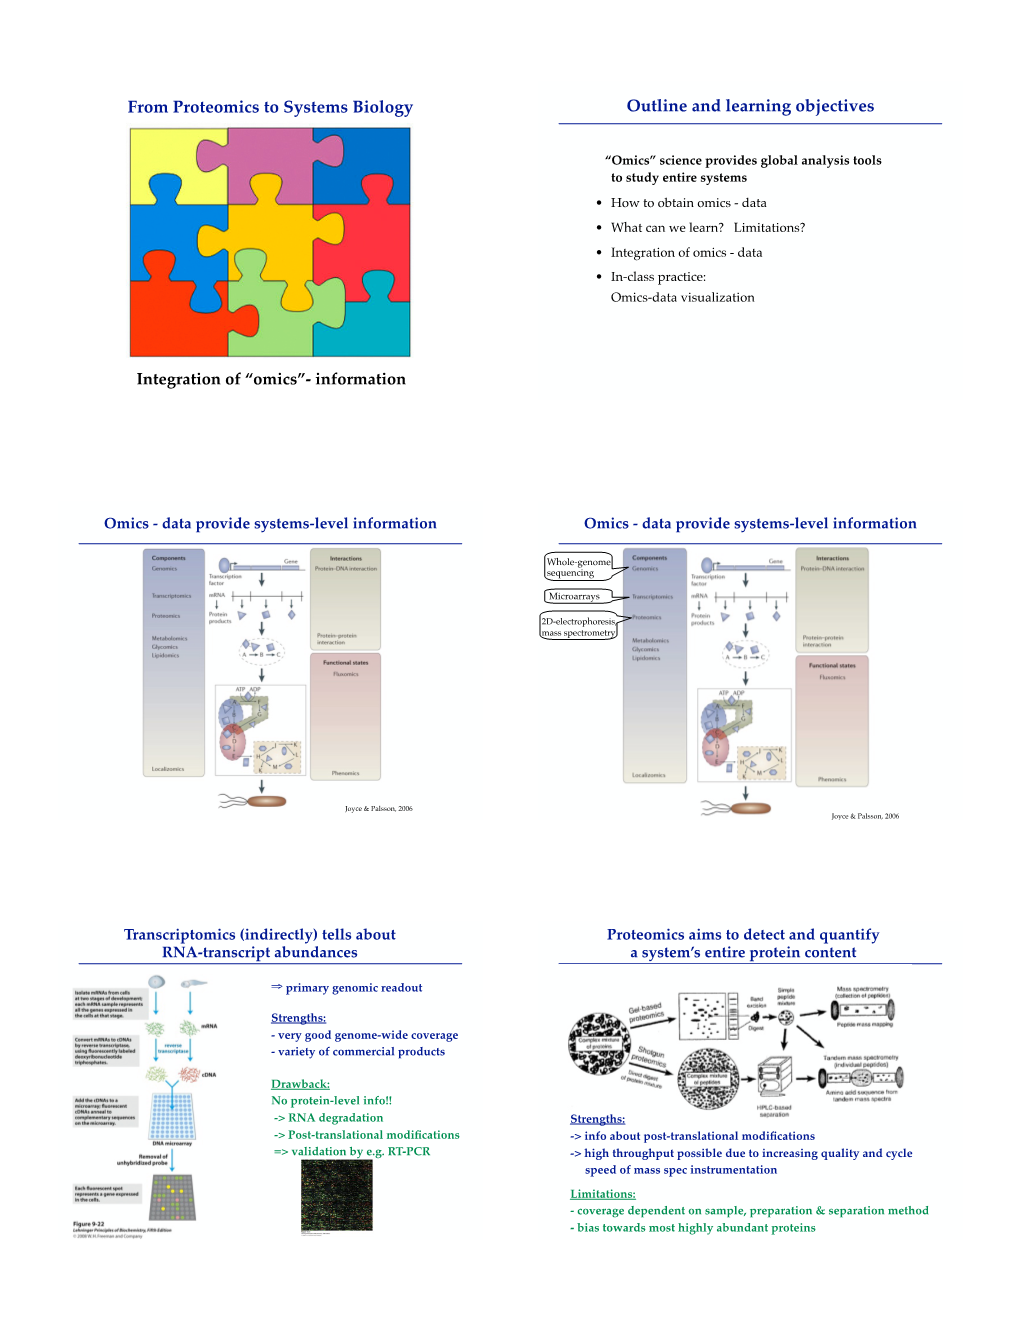 From Proteomics to Systems Biology Outline and Learning Objectives